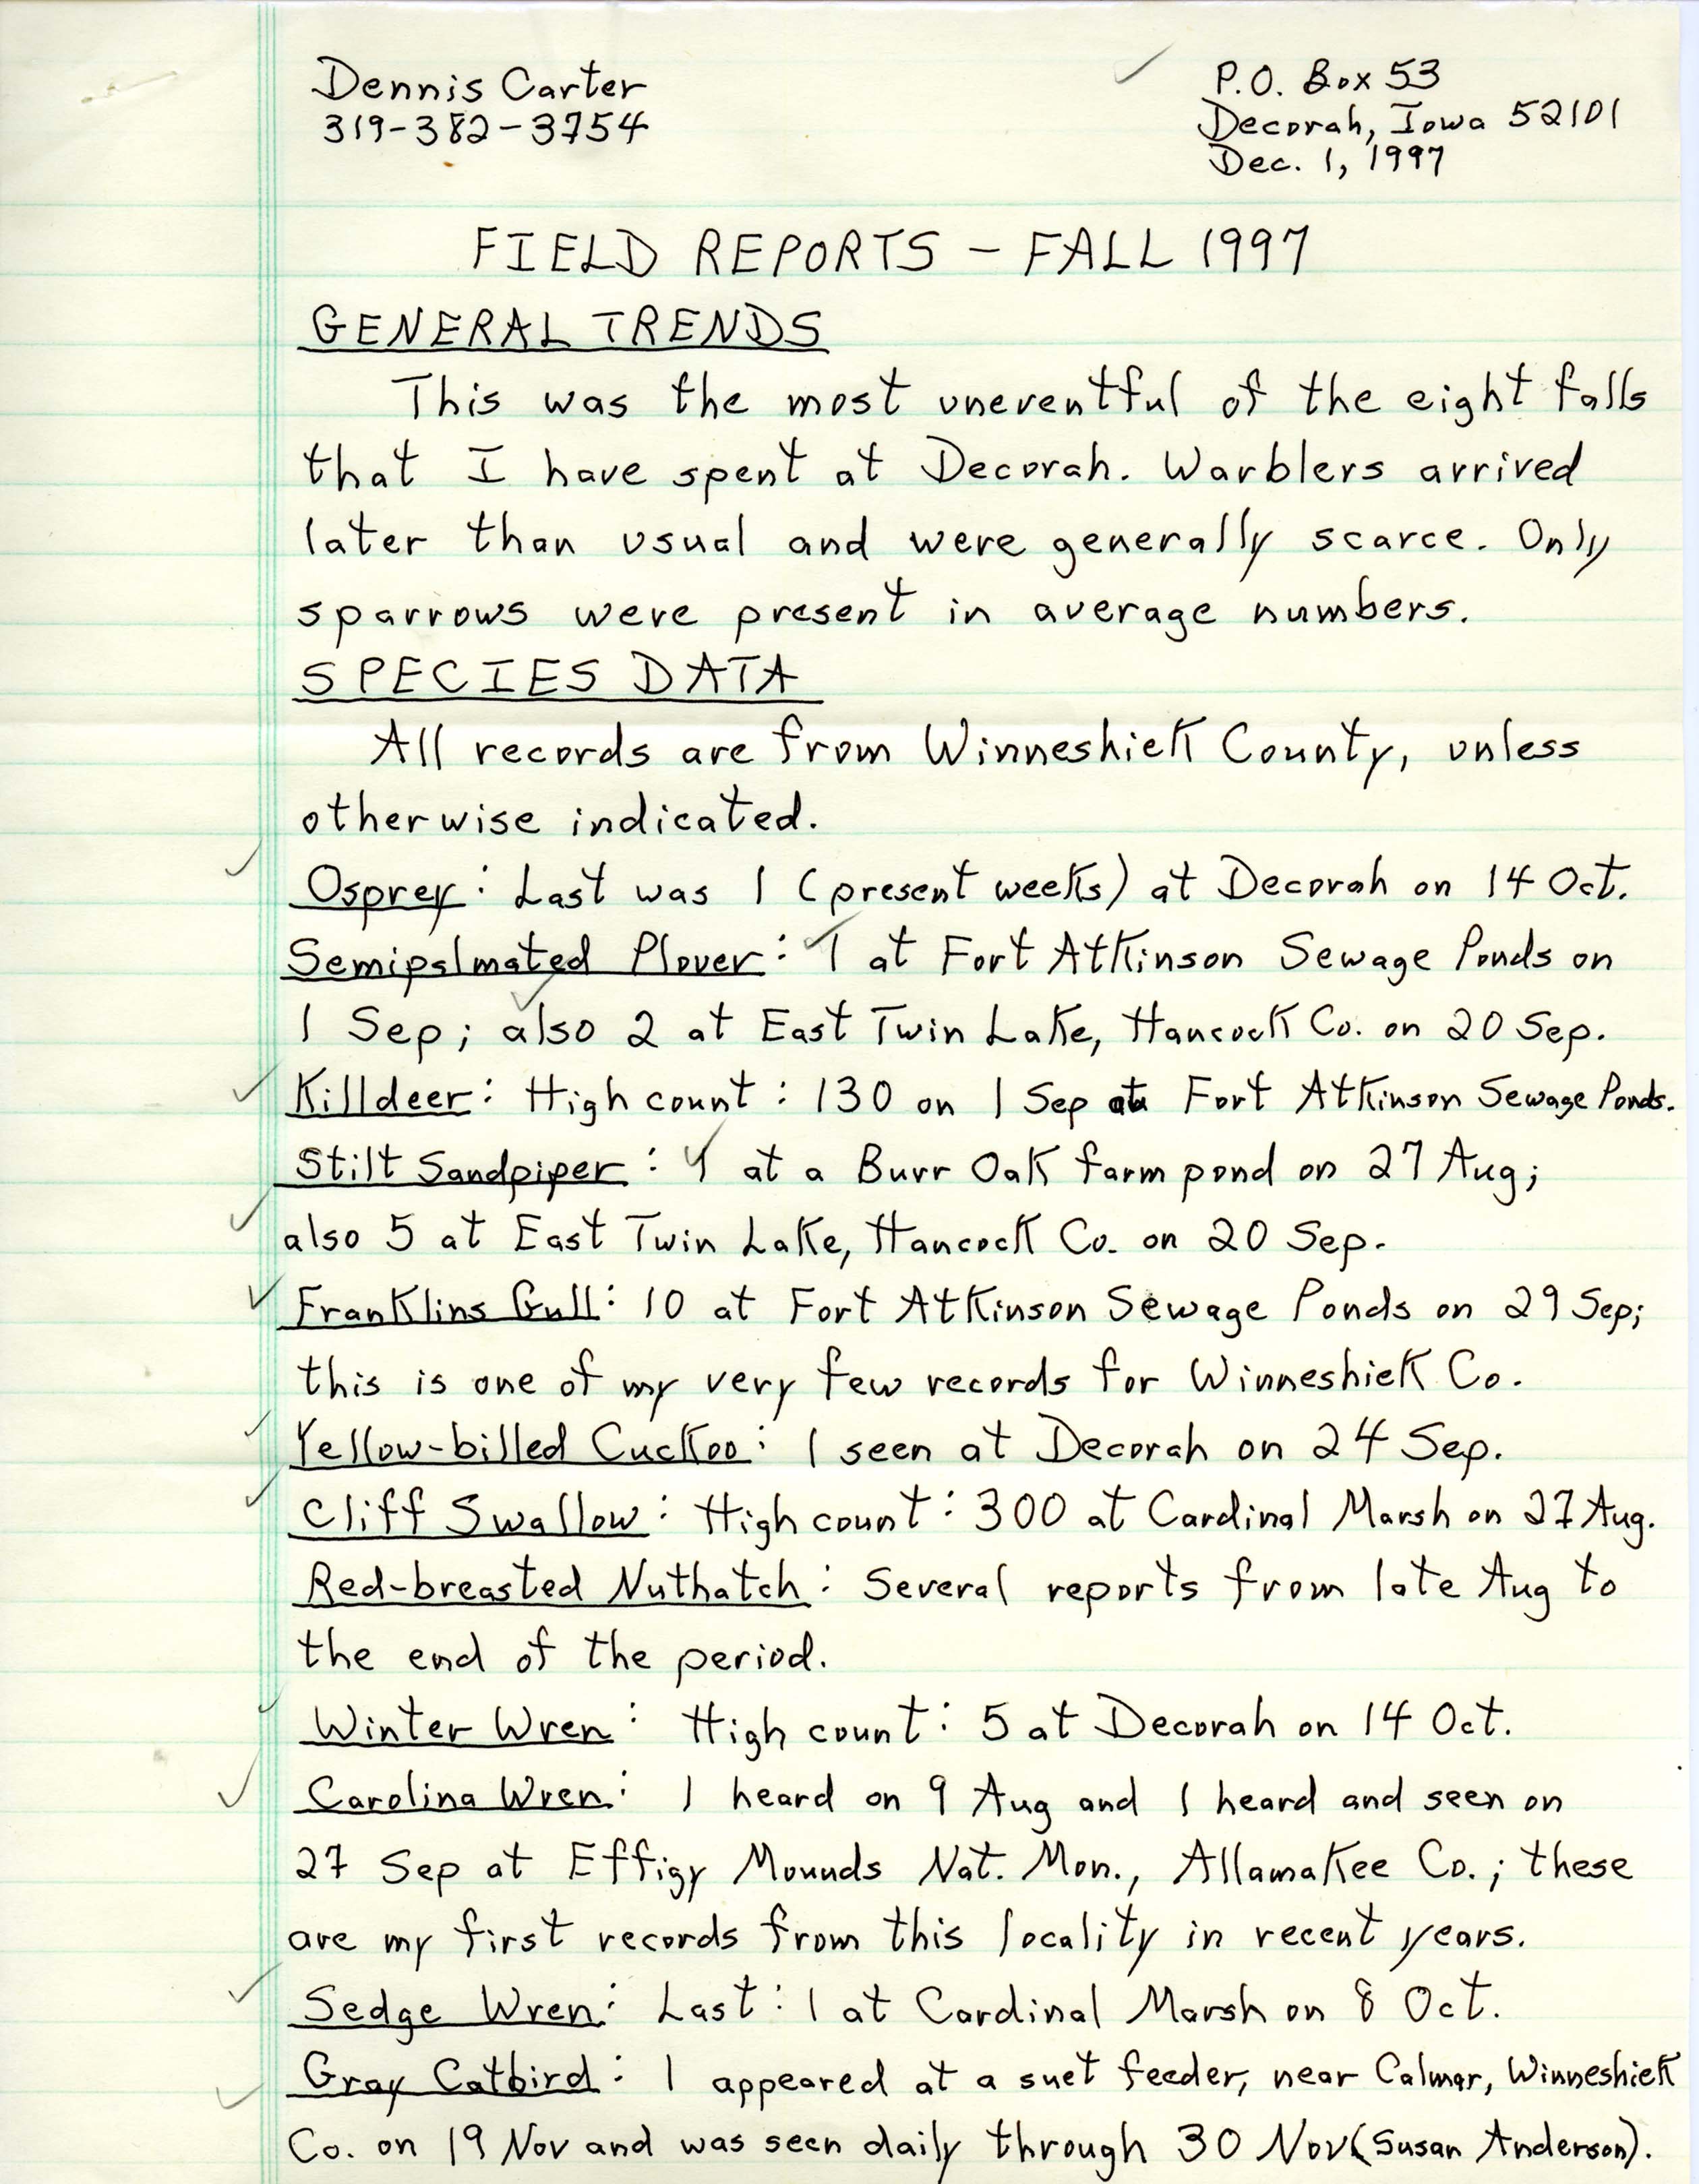 Field notes contributed by Dennis L. Carter, December 1, 1997